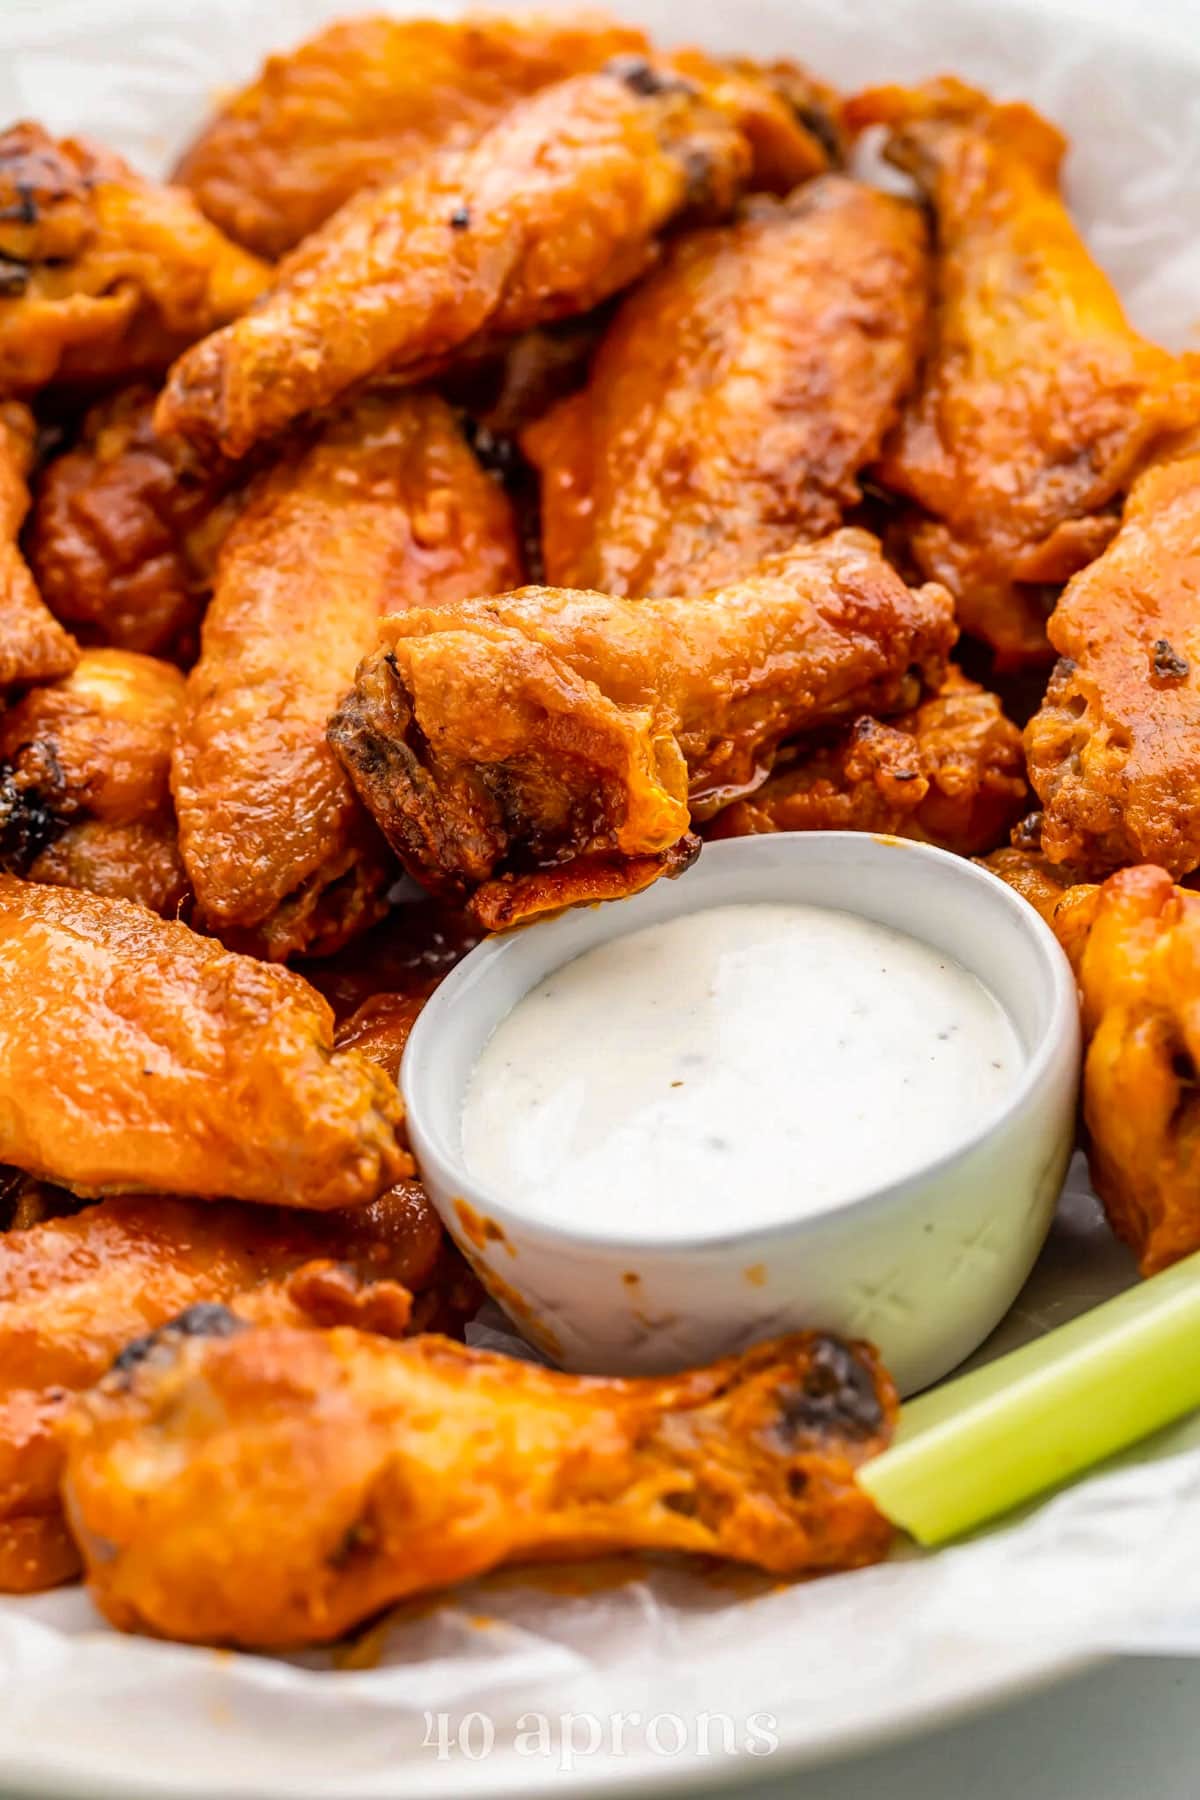 A platter of Whole30 buffalo chicken wings with a small dipping bowl of Whole30 ranch dressing and celery sticks.